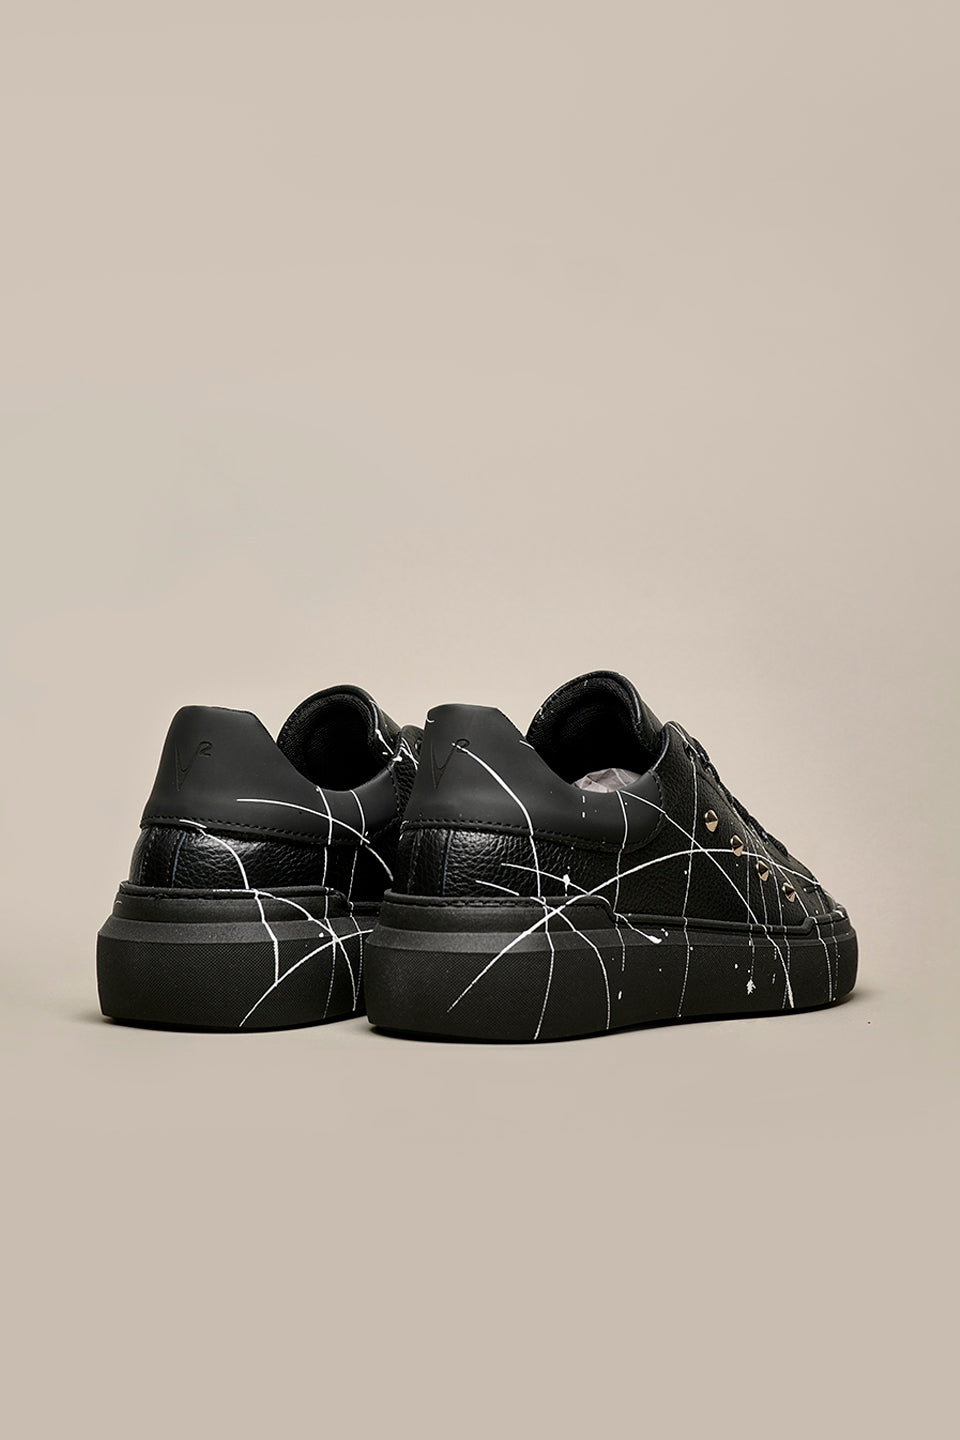 HAMMER - High sole sneakers in black hammered leather with studs and paint splashes